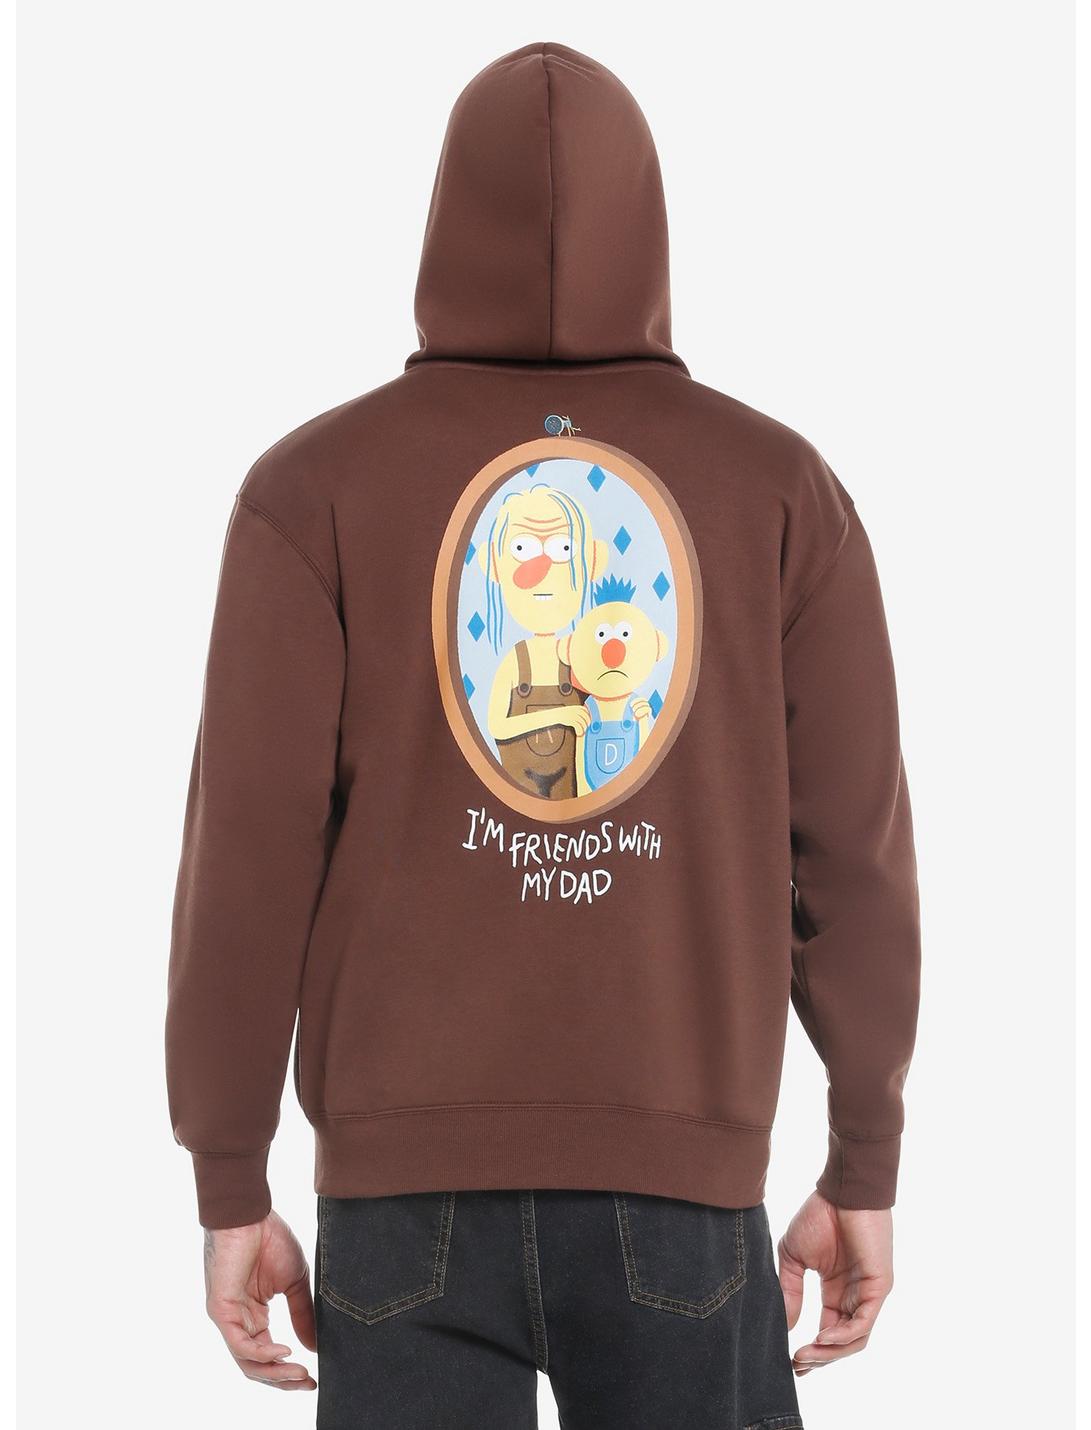 Don't Hug Me I'm Scared Friends With My Dad Hoodie, BROWN, hi-res